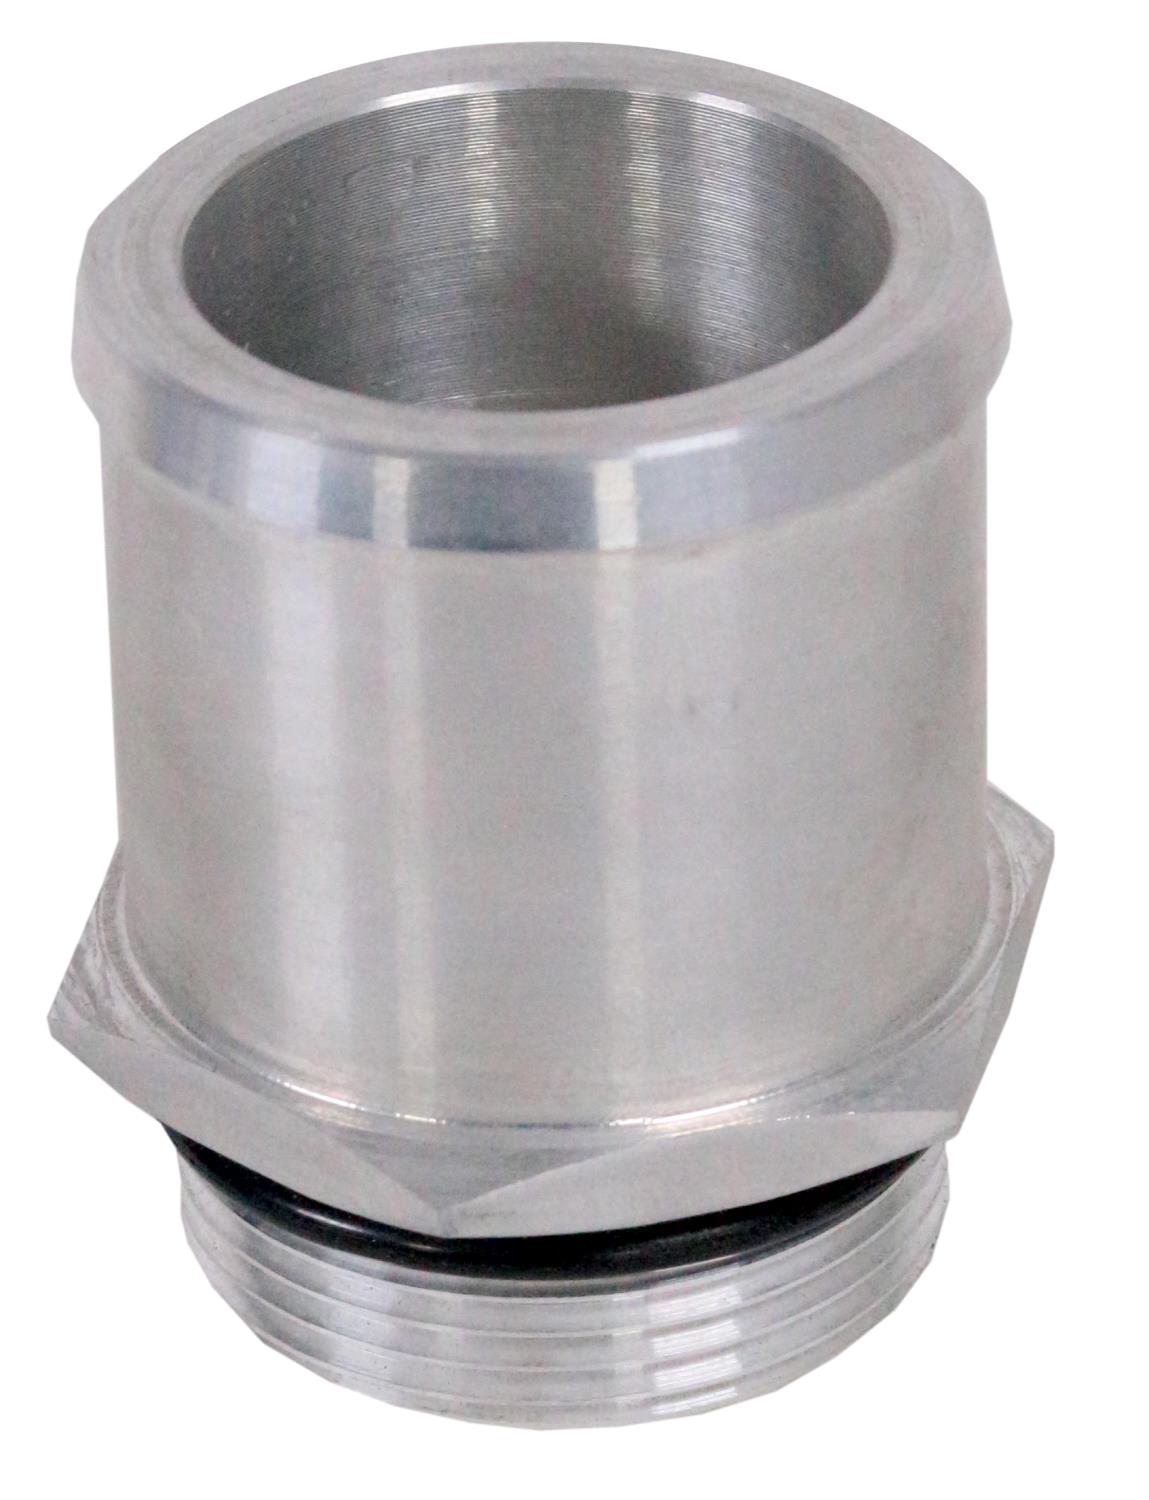 1 5/8 in.-12 UNJ Male to 1 3/4 in. Hose Threaded Hose Adapter Fitting